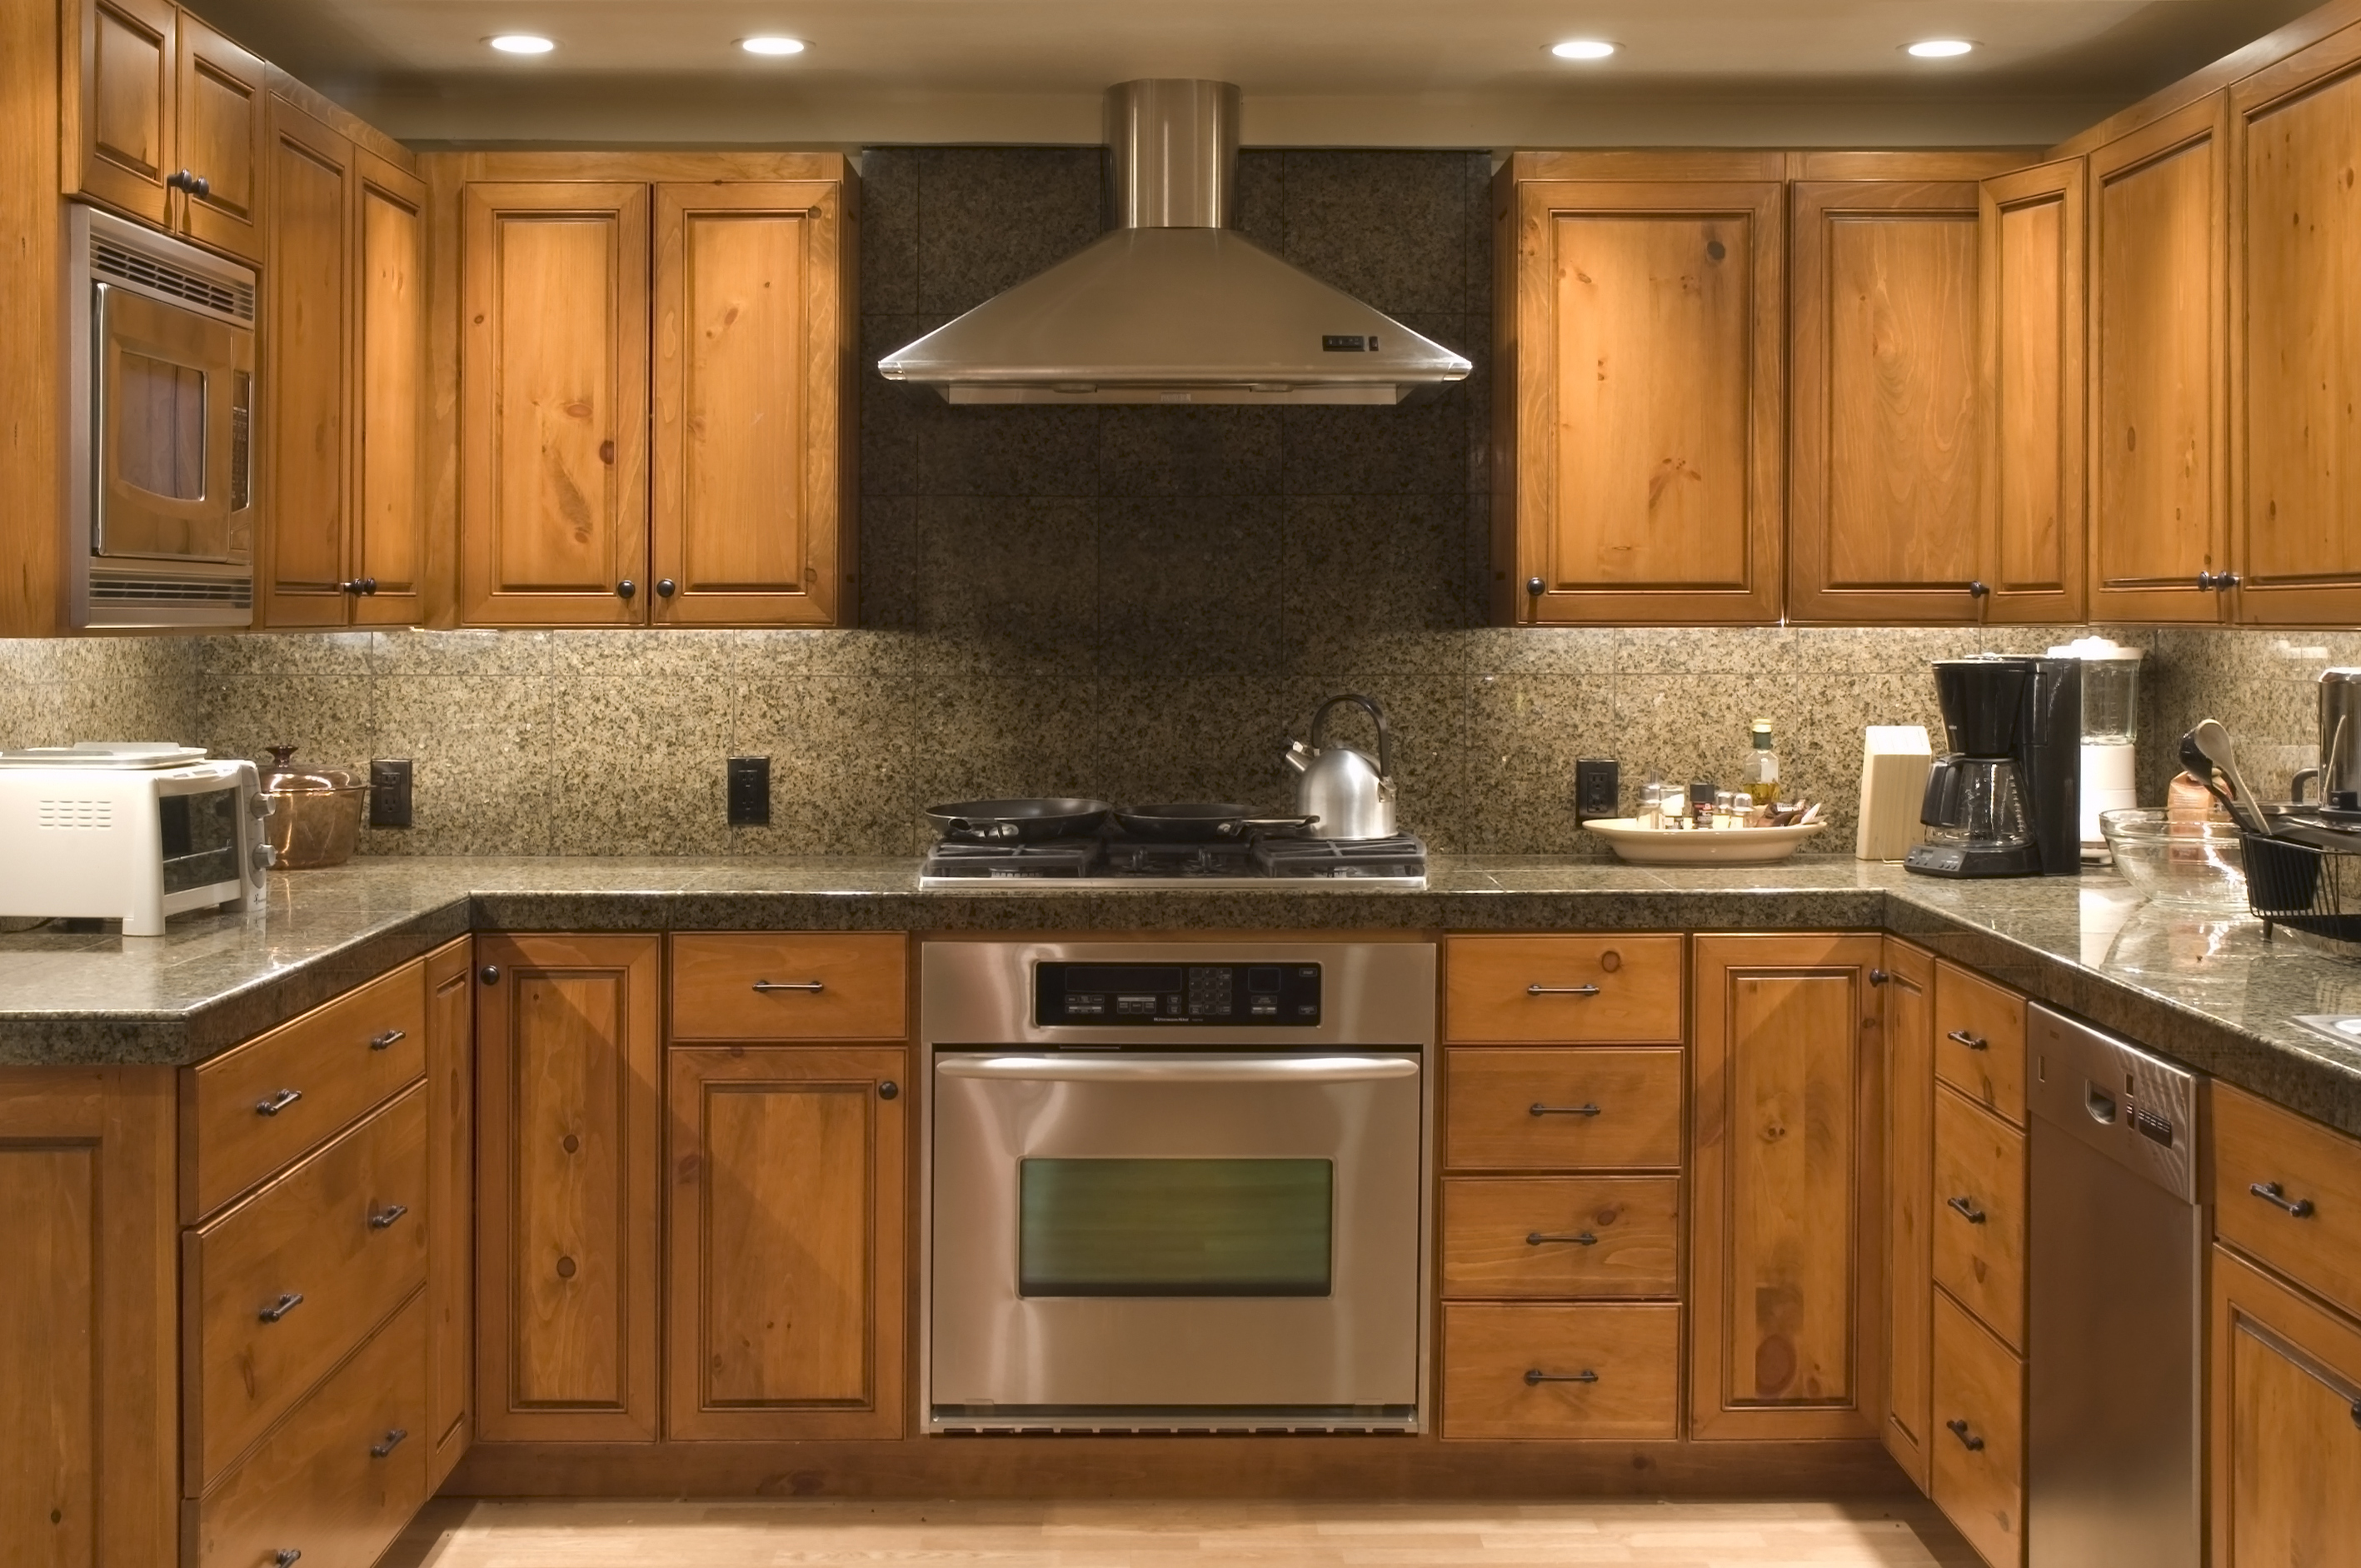 Select Floors Offers Kitchen Cabinet Refacing in Alpharetta Call 770-218-3462